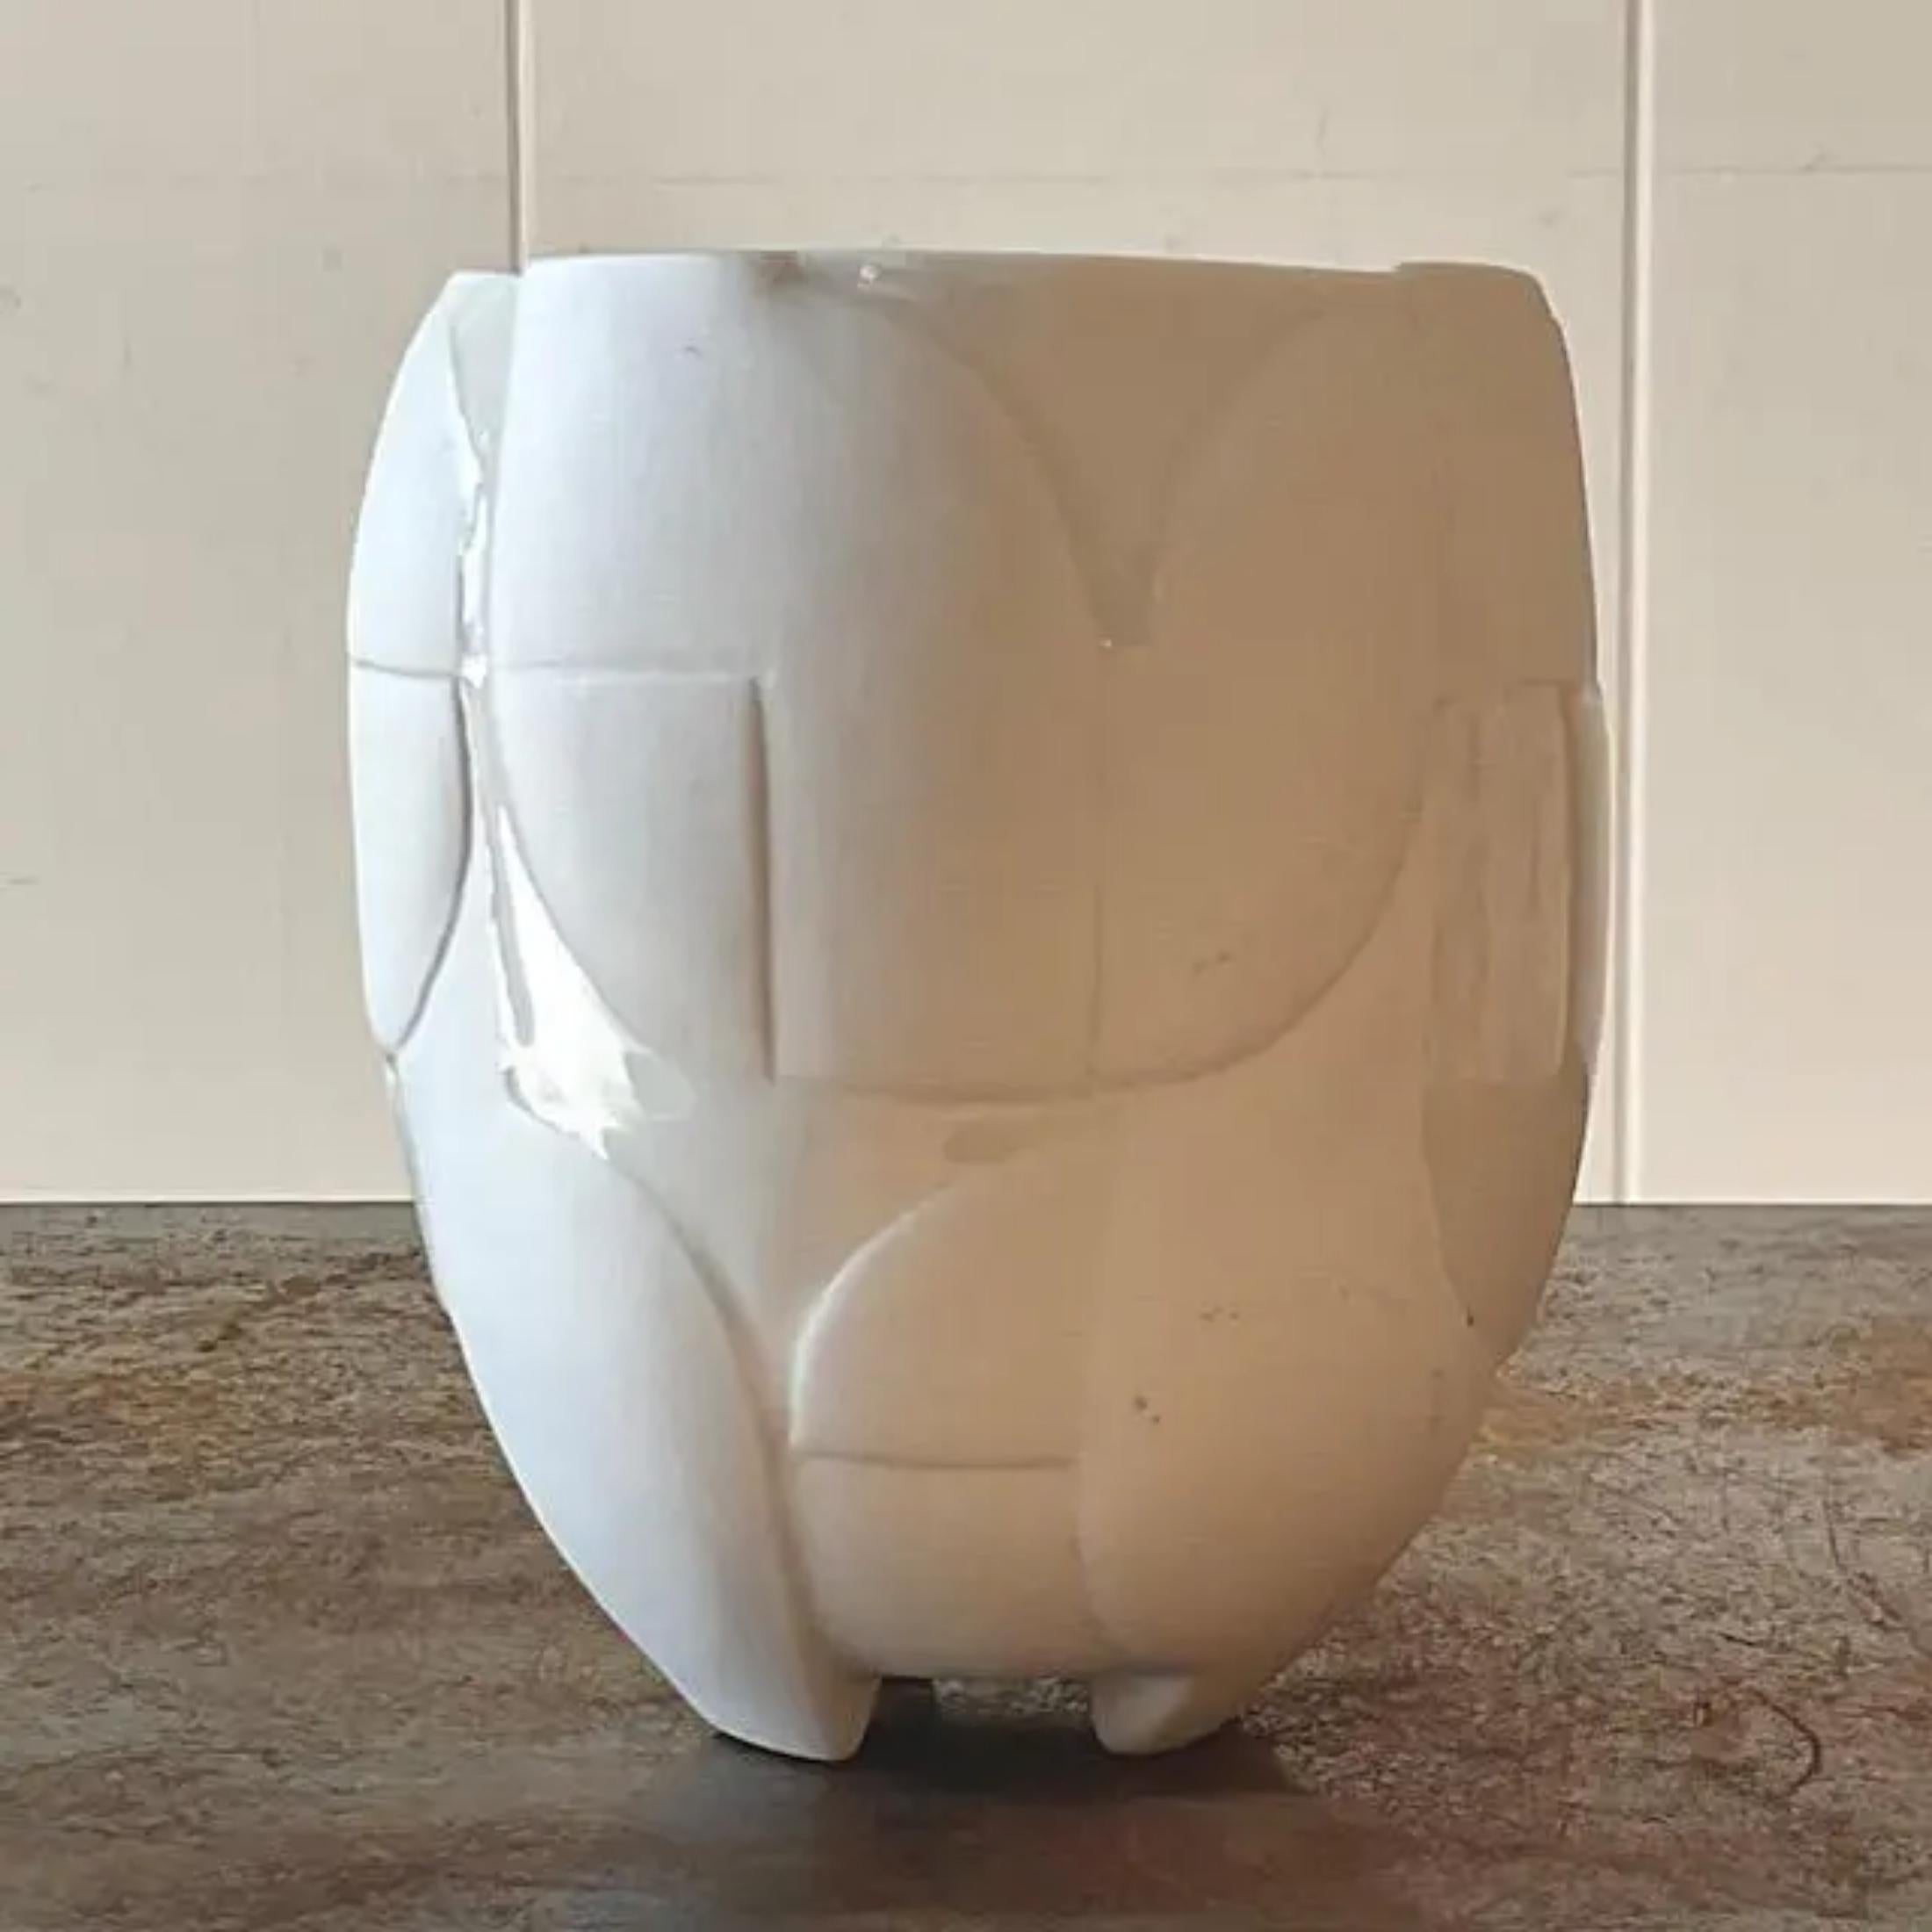 A fabulous vintage Boho studio pottery vase. A chic geometric design in a combo matte and gloss finish. Signed by the artist. Acquired from a Palm Beach estate.